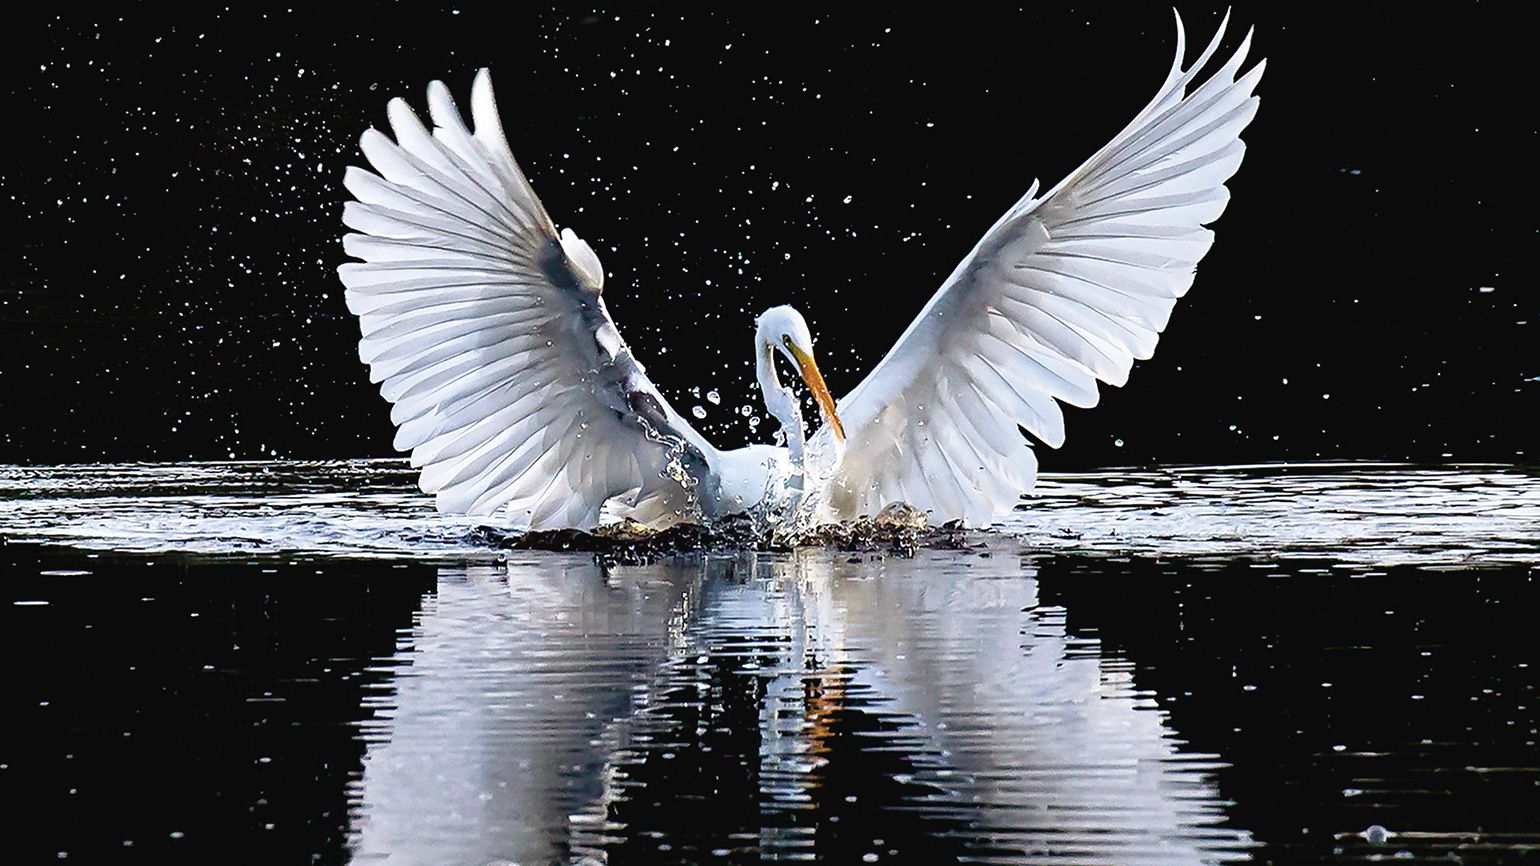 An angelic egret on the water with its wings fully spread